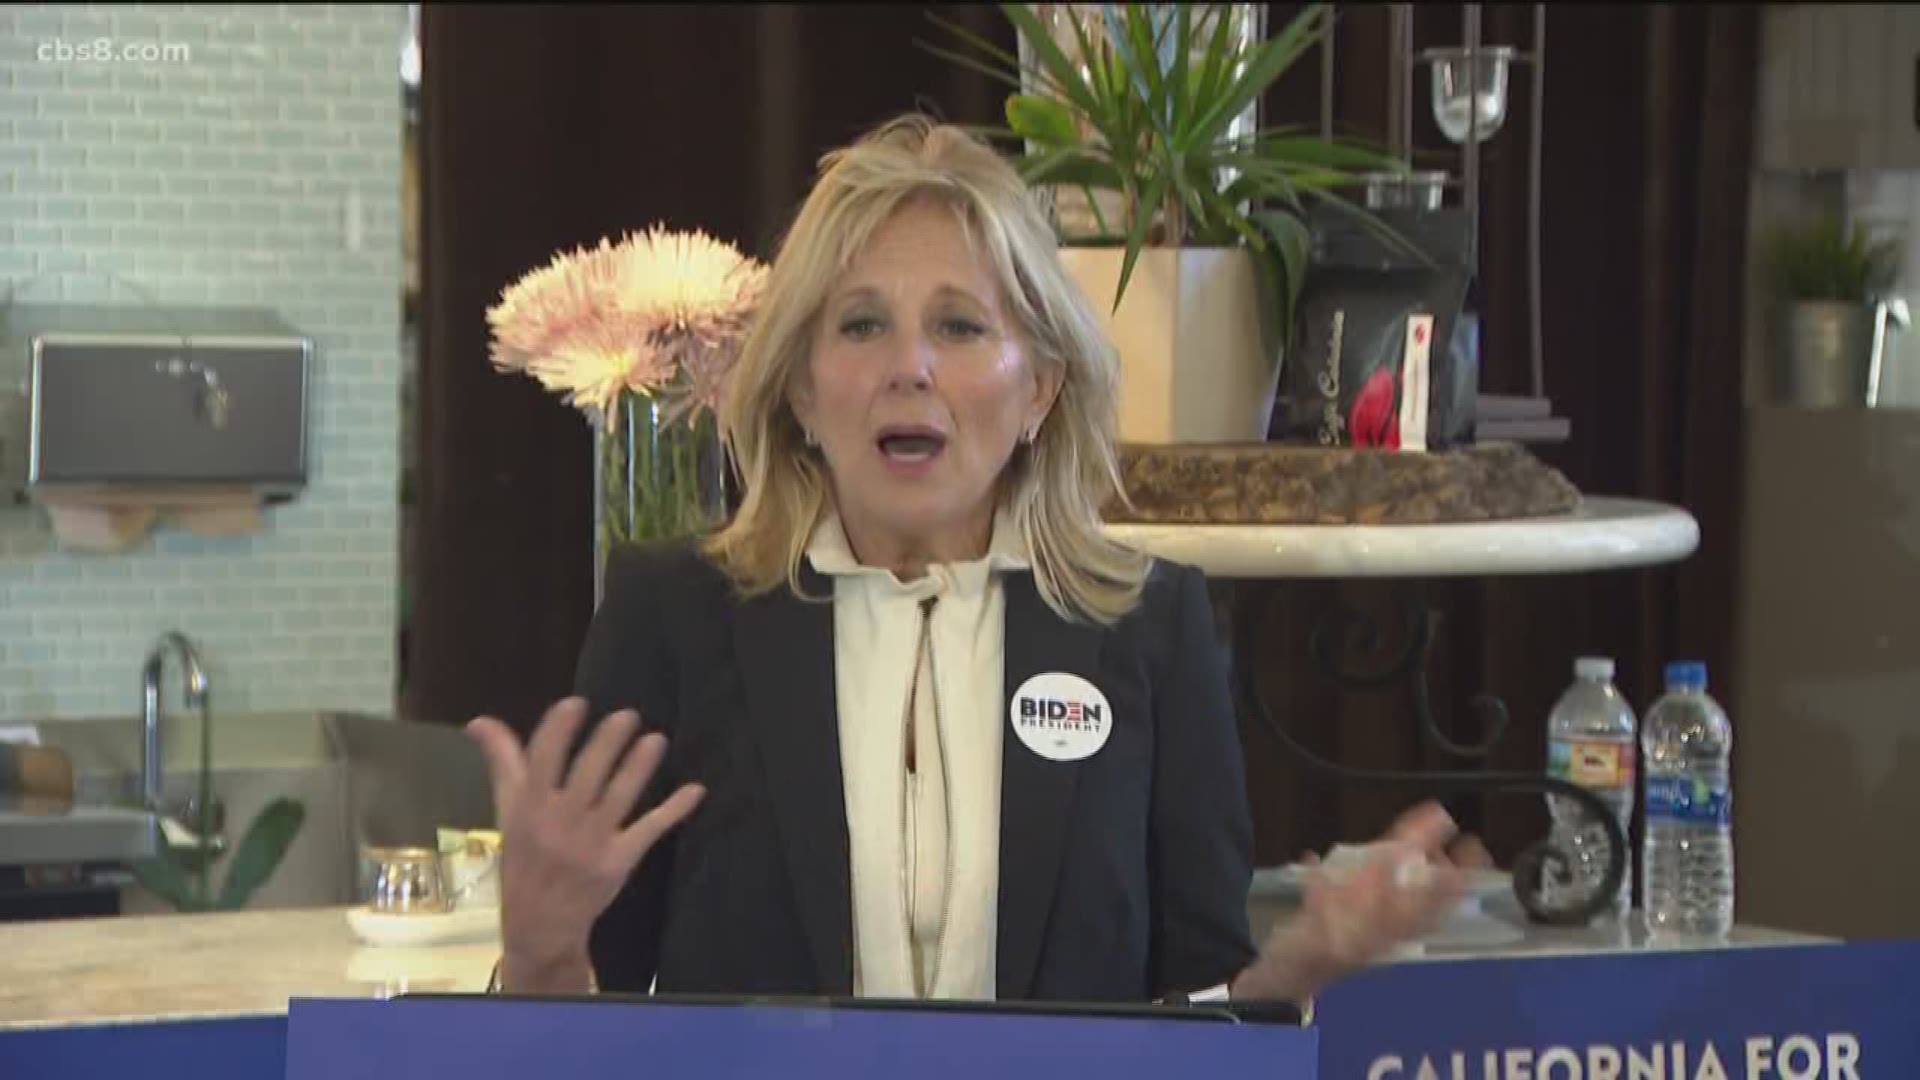 Dr. Biden also met with San Diego military families and union workers.